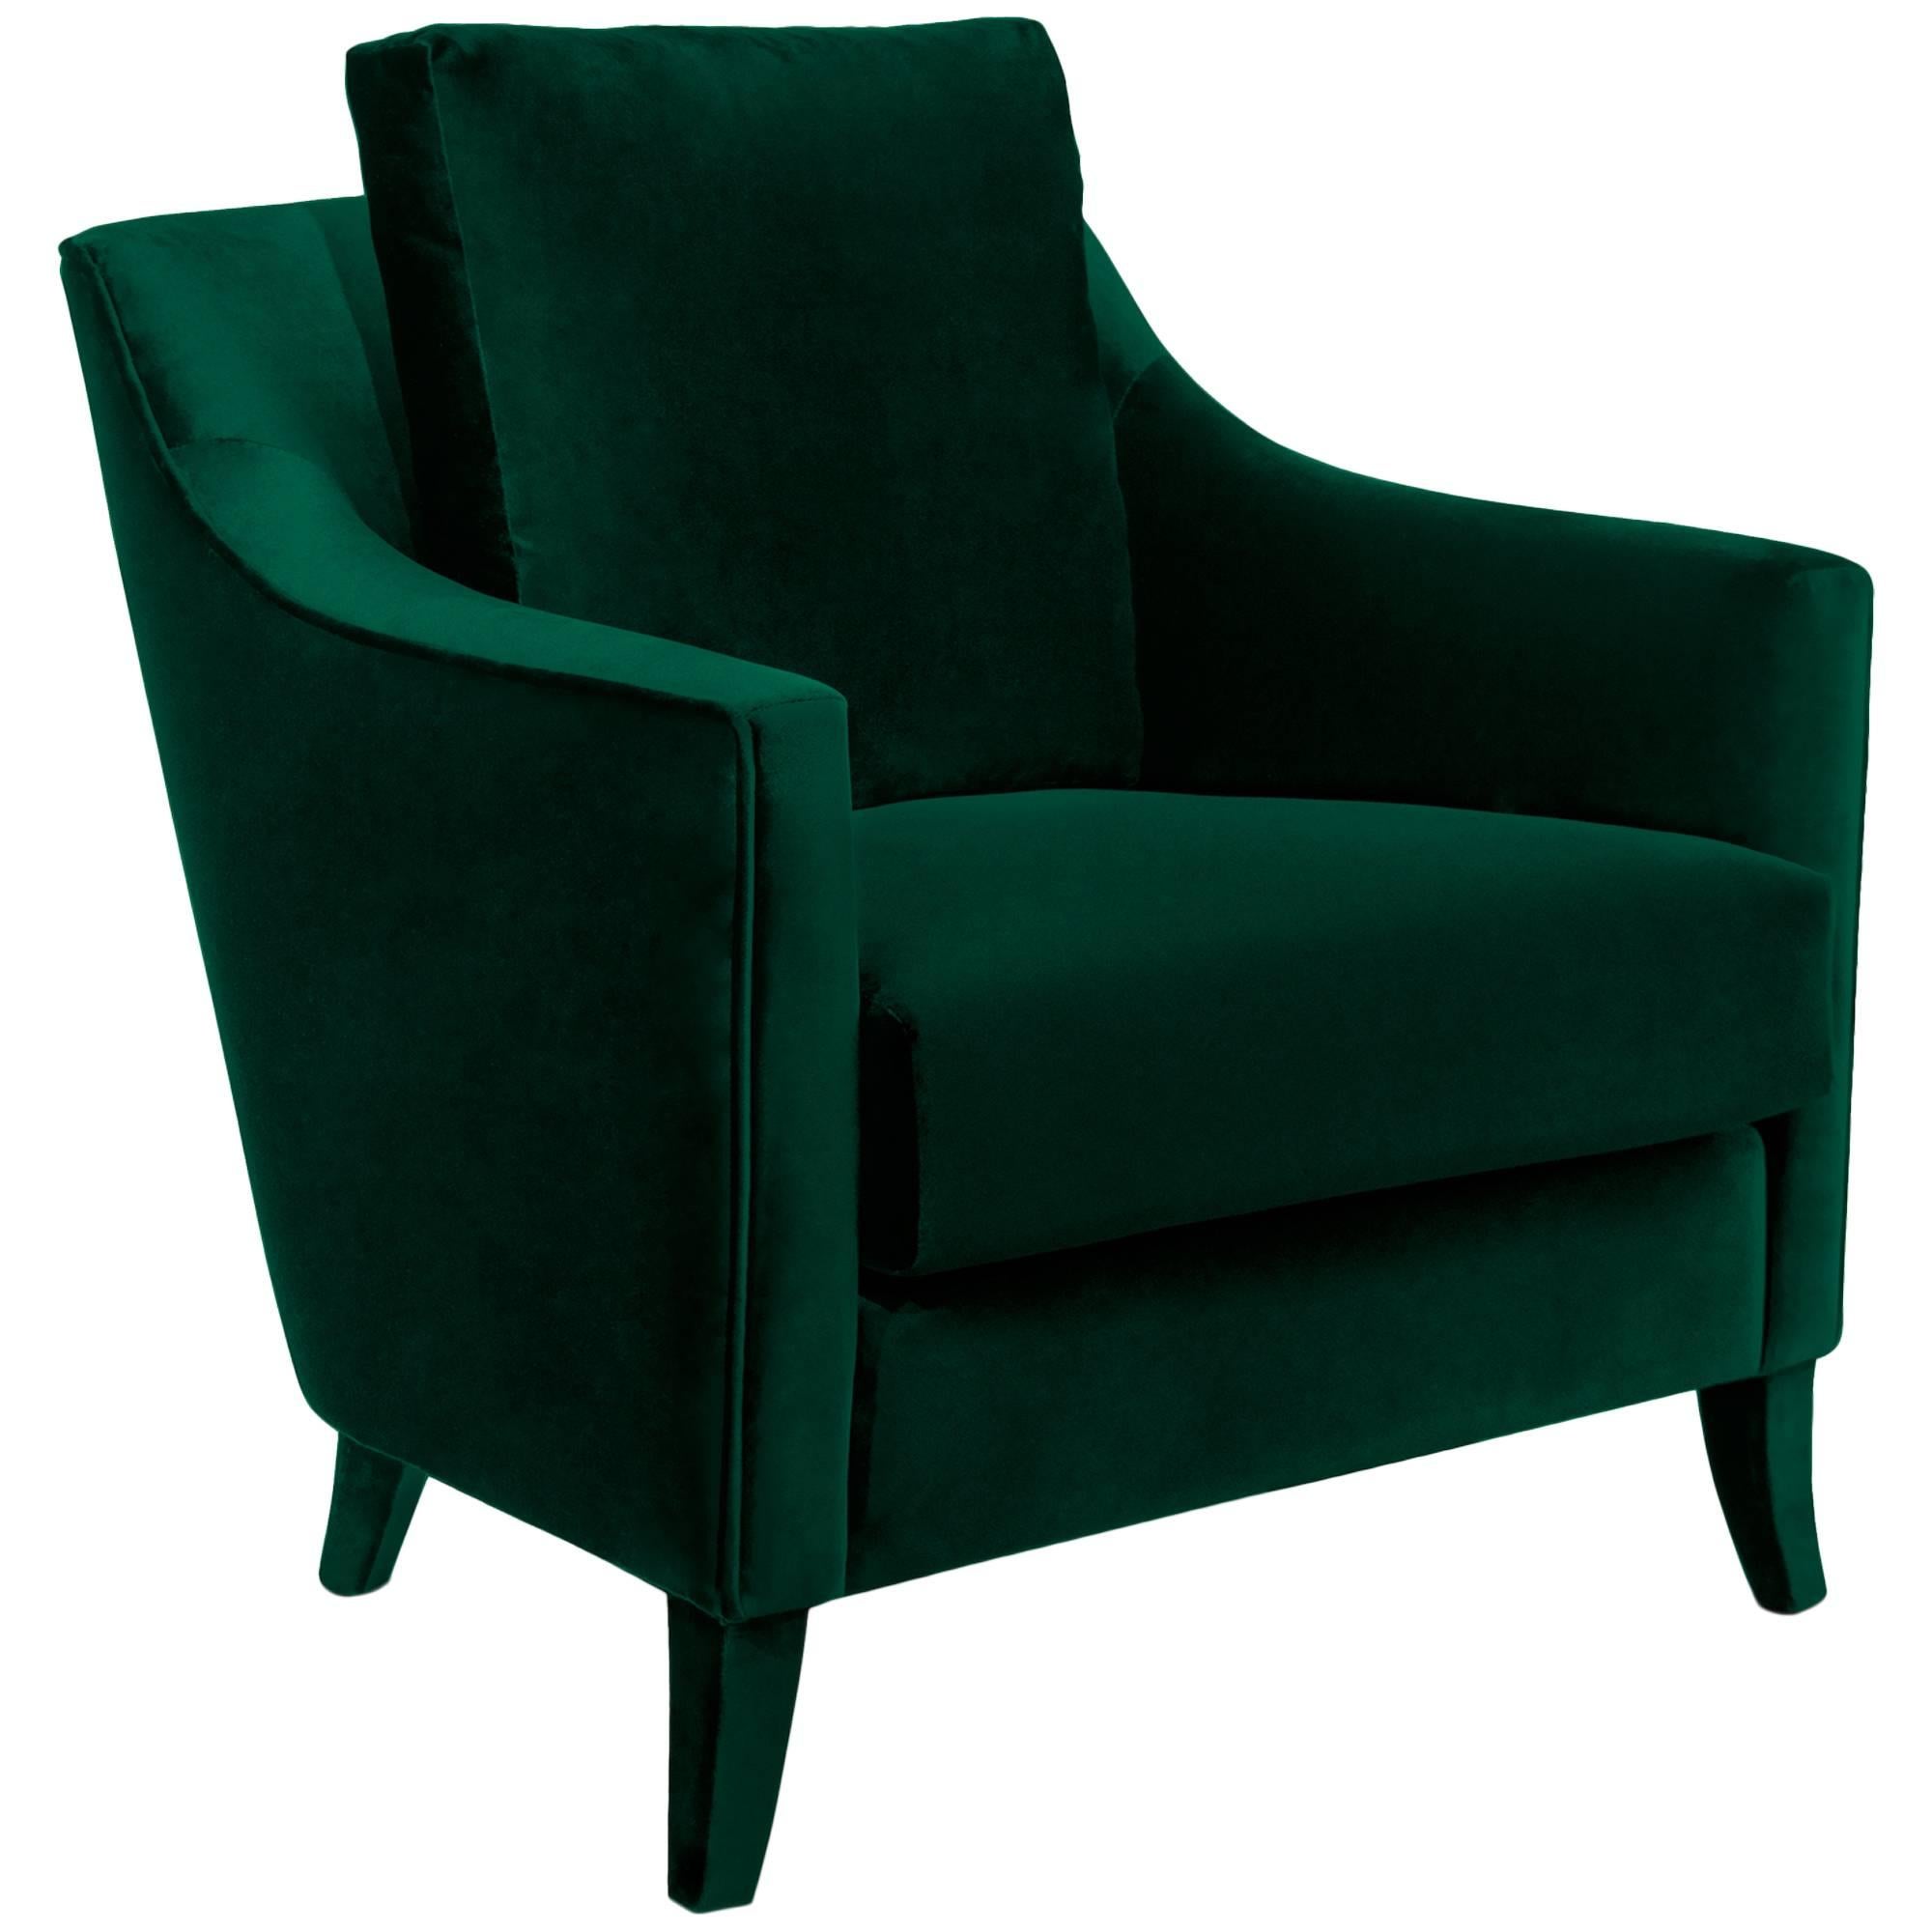 British Green Armchair covered with Velvet